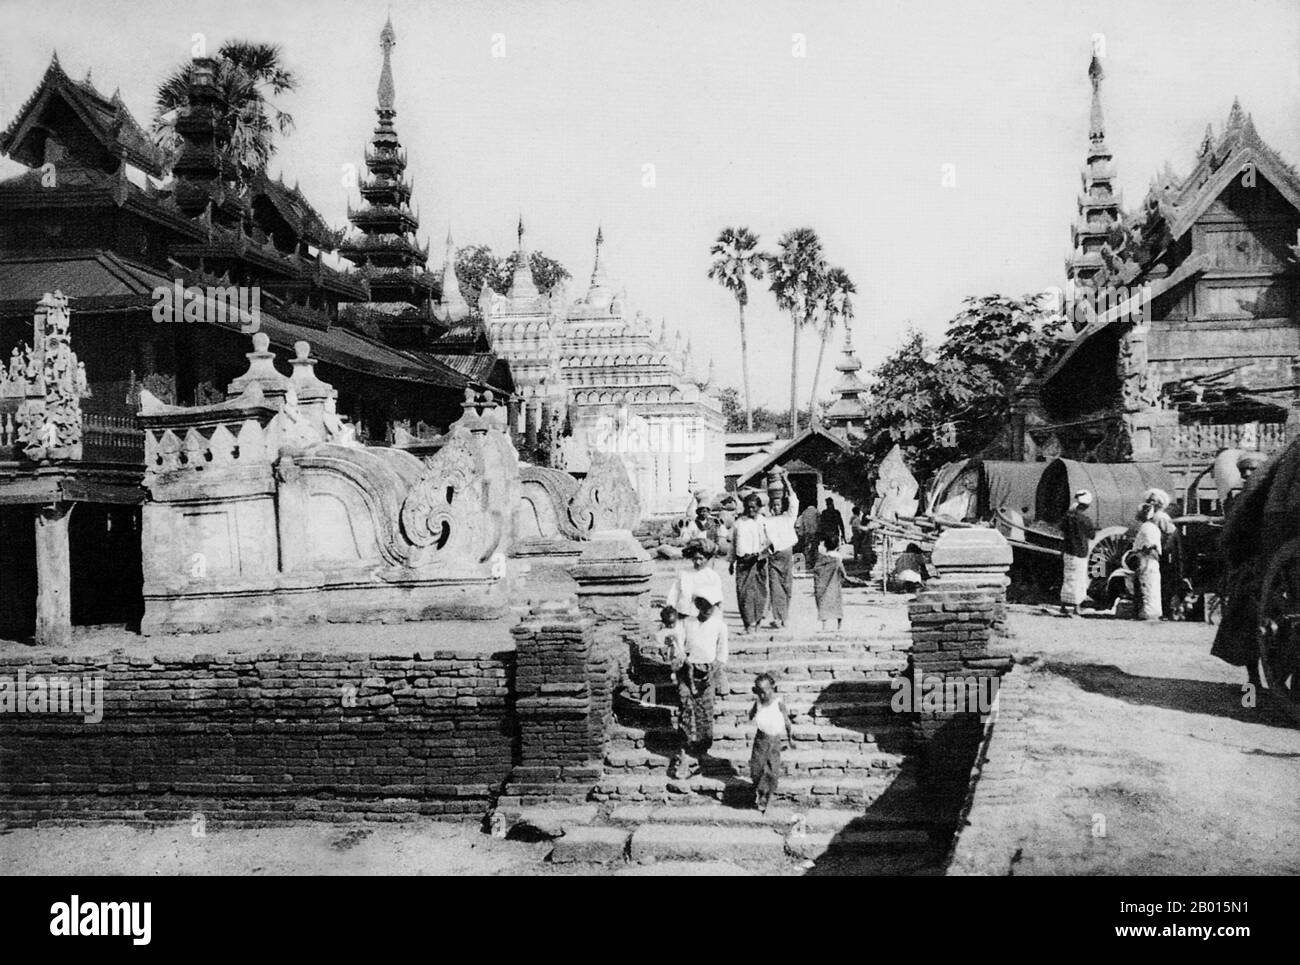 Burma/Myanmar: The Ananda Pagoda in Bagan, Upper Burma, c. 1920s.  Perhaps the highest revered temple in Bagan, the Ananda Pagoda was built in 1105 CE during the reign of King Kyanzittha (1084–1113) of the Bagan Dynasty. It is one of four surviving original temples of Bagan (also called Pagan). The temple layout is in a cruciform with several terraces leading to a small pagoda at the top covered by an umbrella (‘hti’).  The Buddhist temple houses four standing Buddhas—facing east, north, west and south. The temple is an architectural wonder in a fusion of Mon and adopted Indian style. Stock Photo